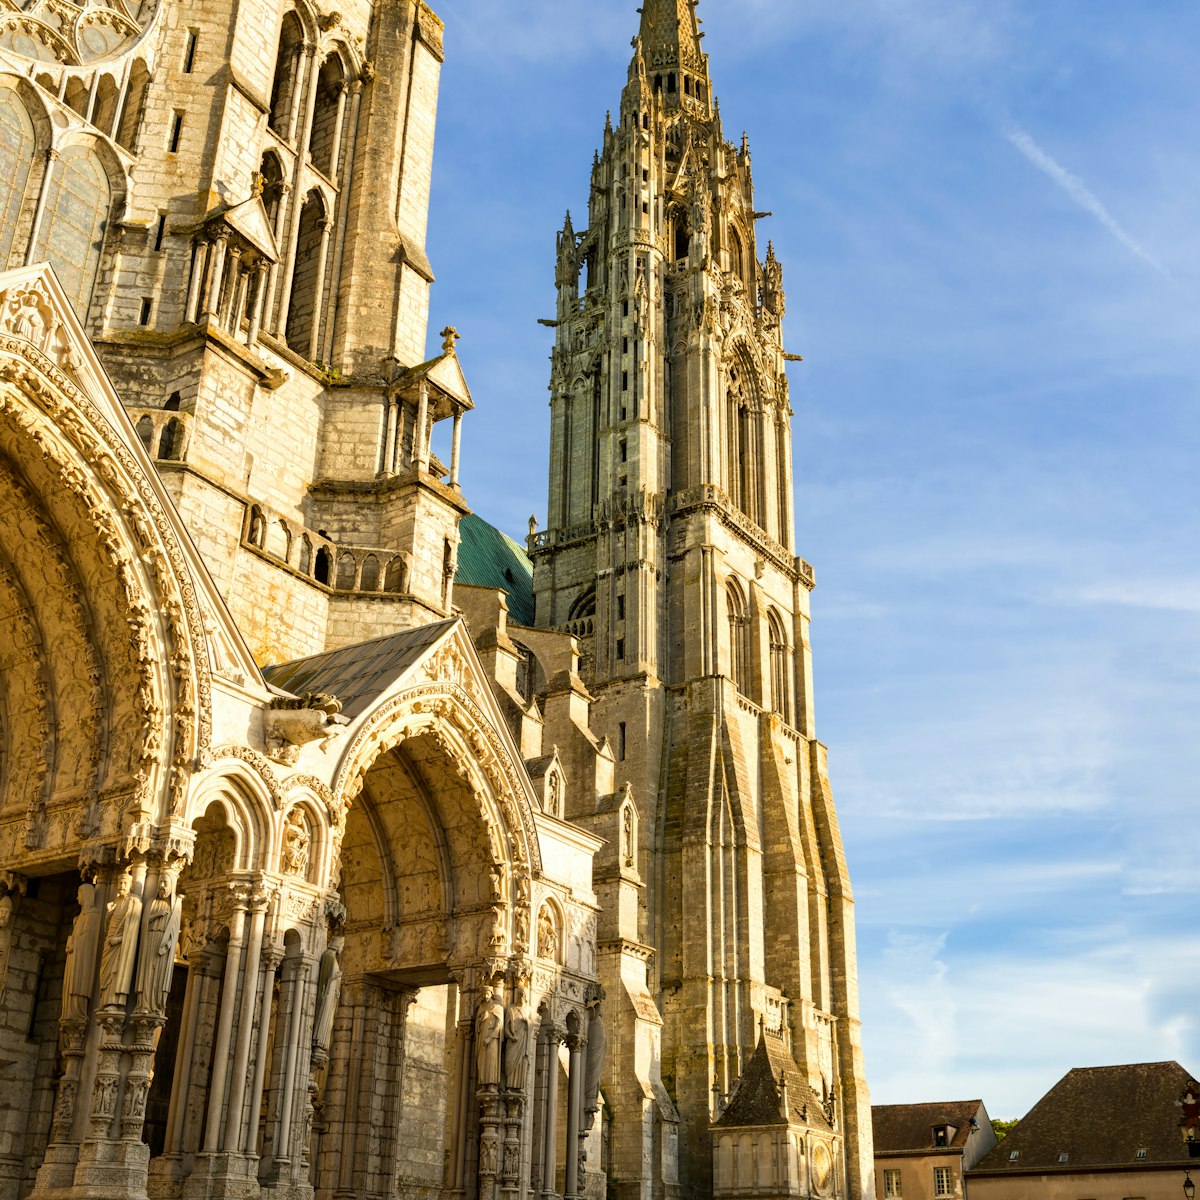 View to the North tower of Chartres Cathedral.